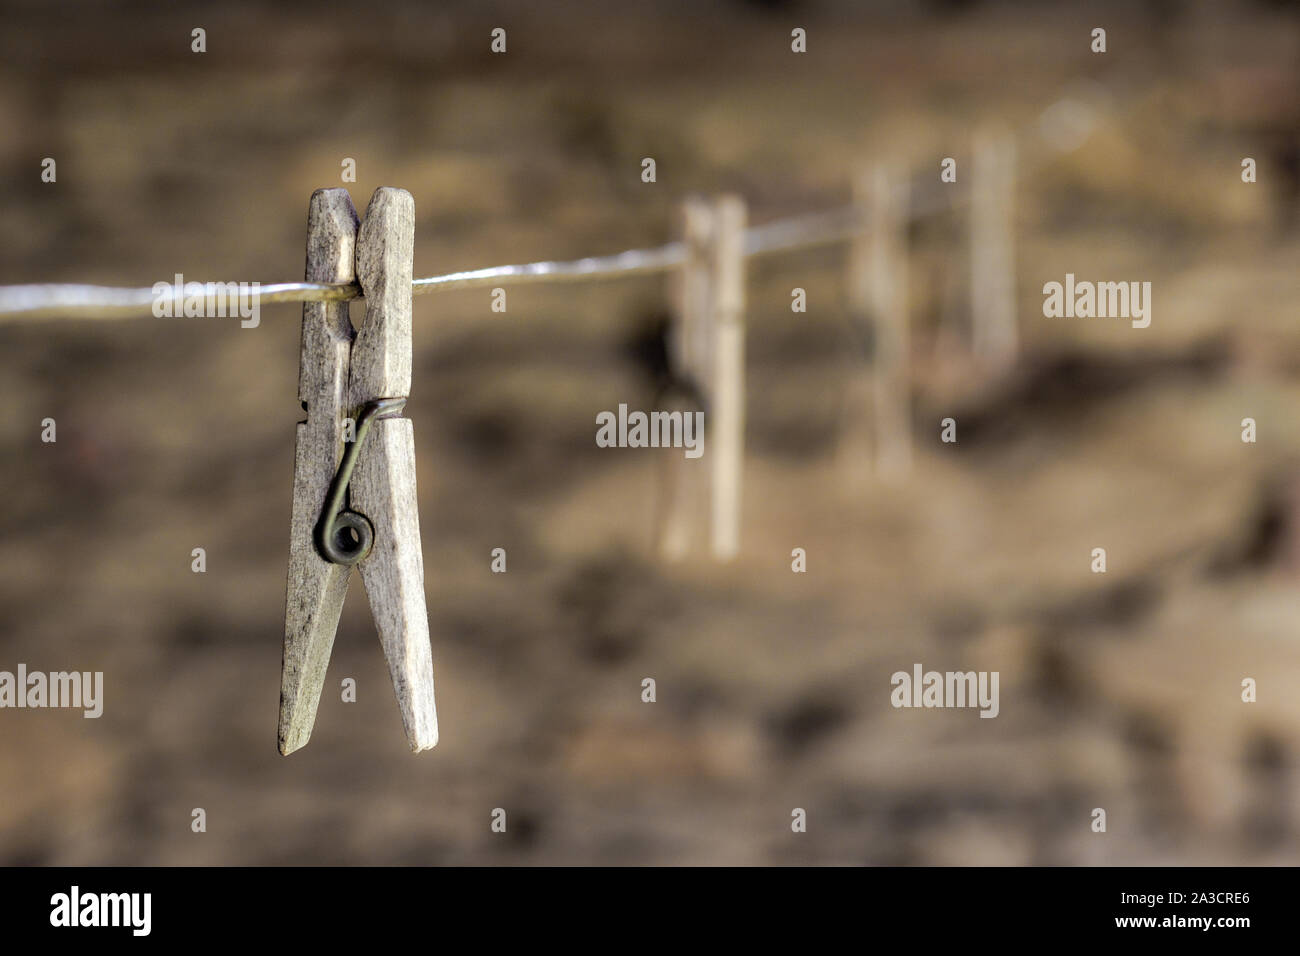 Old wooden clothes pegs on cord with stone wall on background Stock Photo